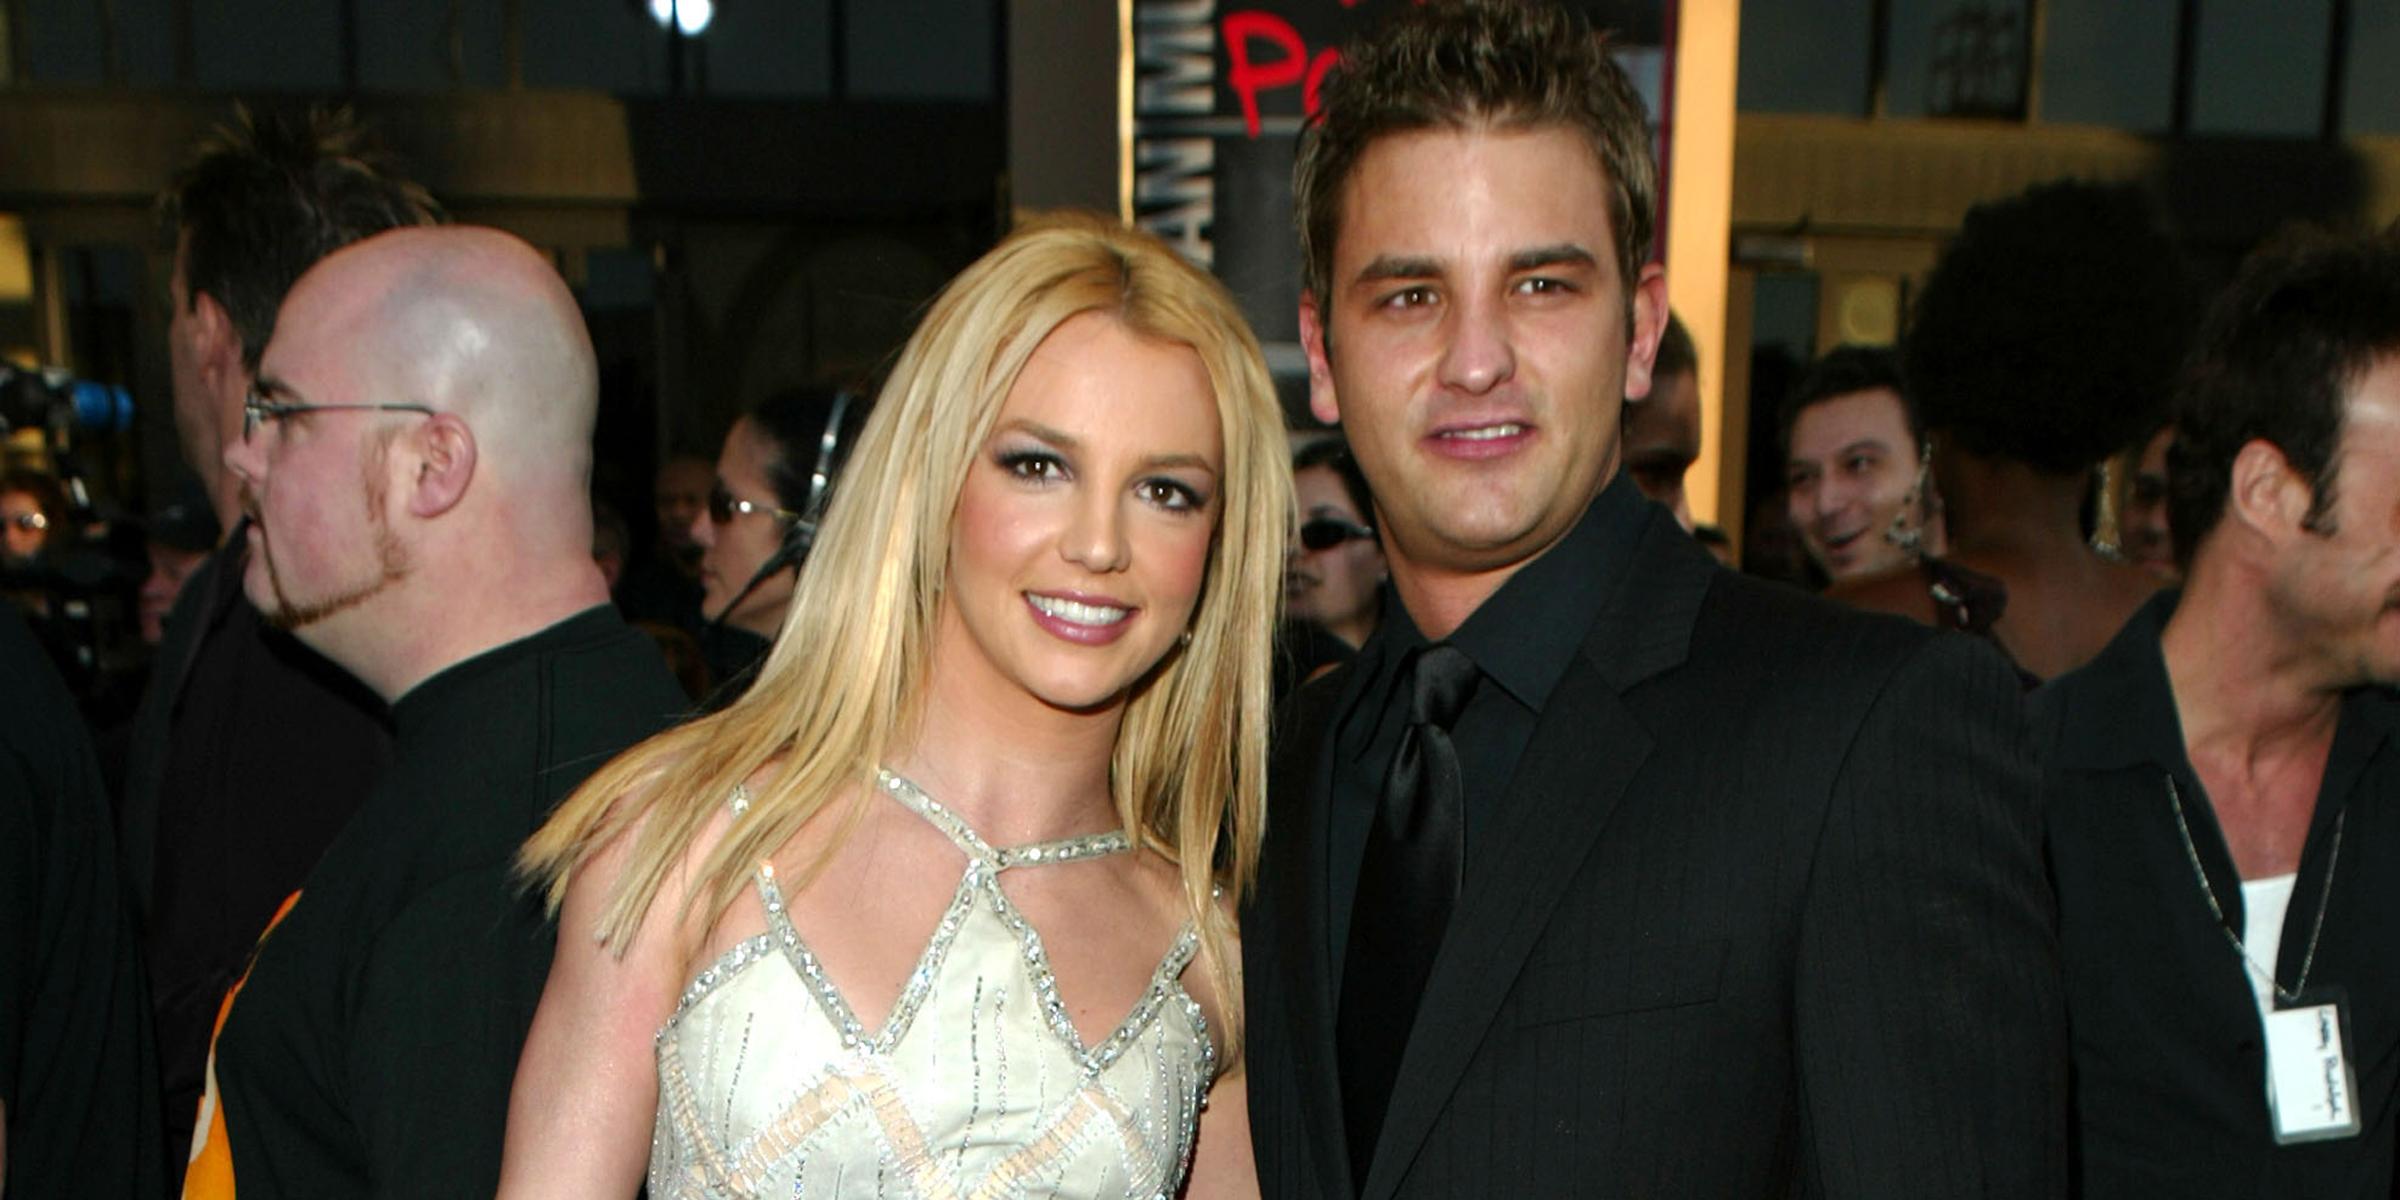 Britney Spears and brother, Bryan Spears during 31st Annual American Music Awards - Arrivals at Shrine Auditorium in Los Angeles, California, United States.